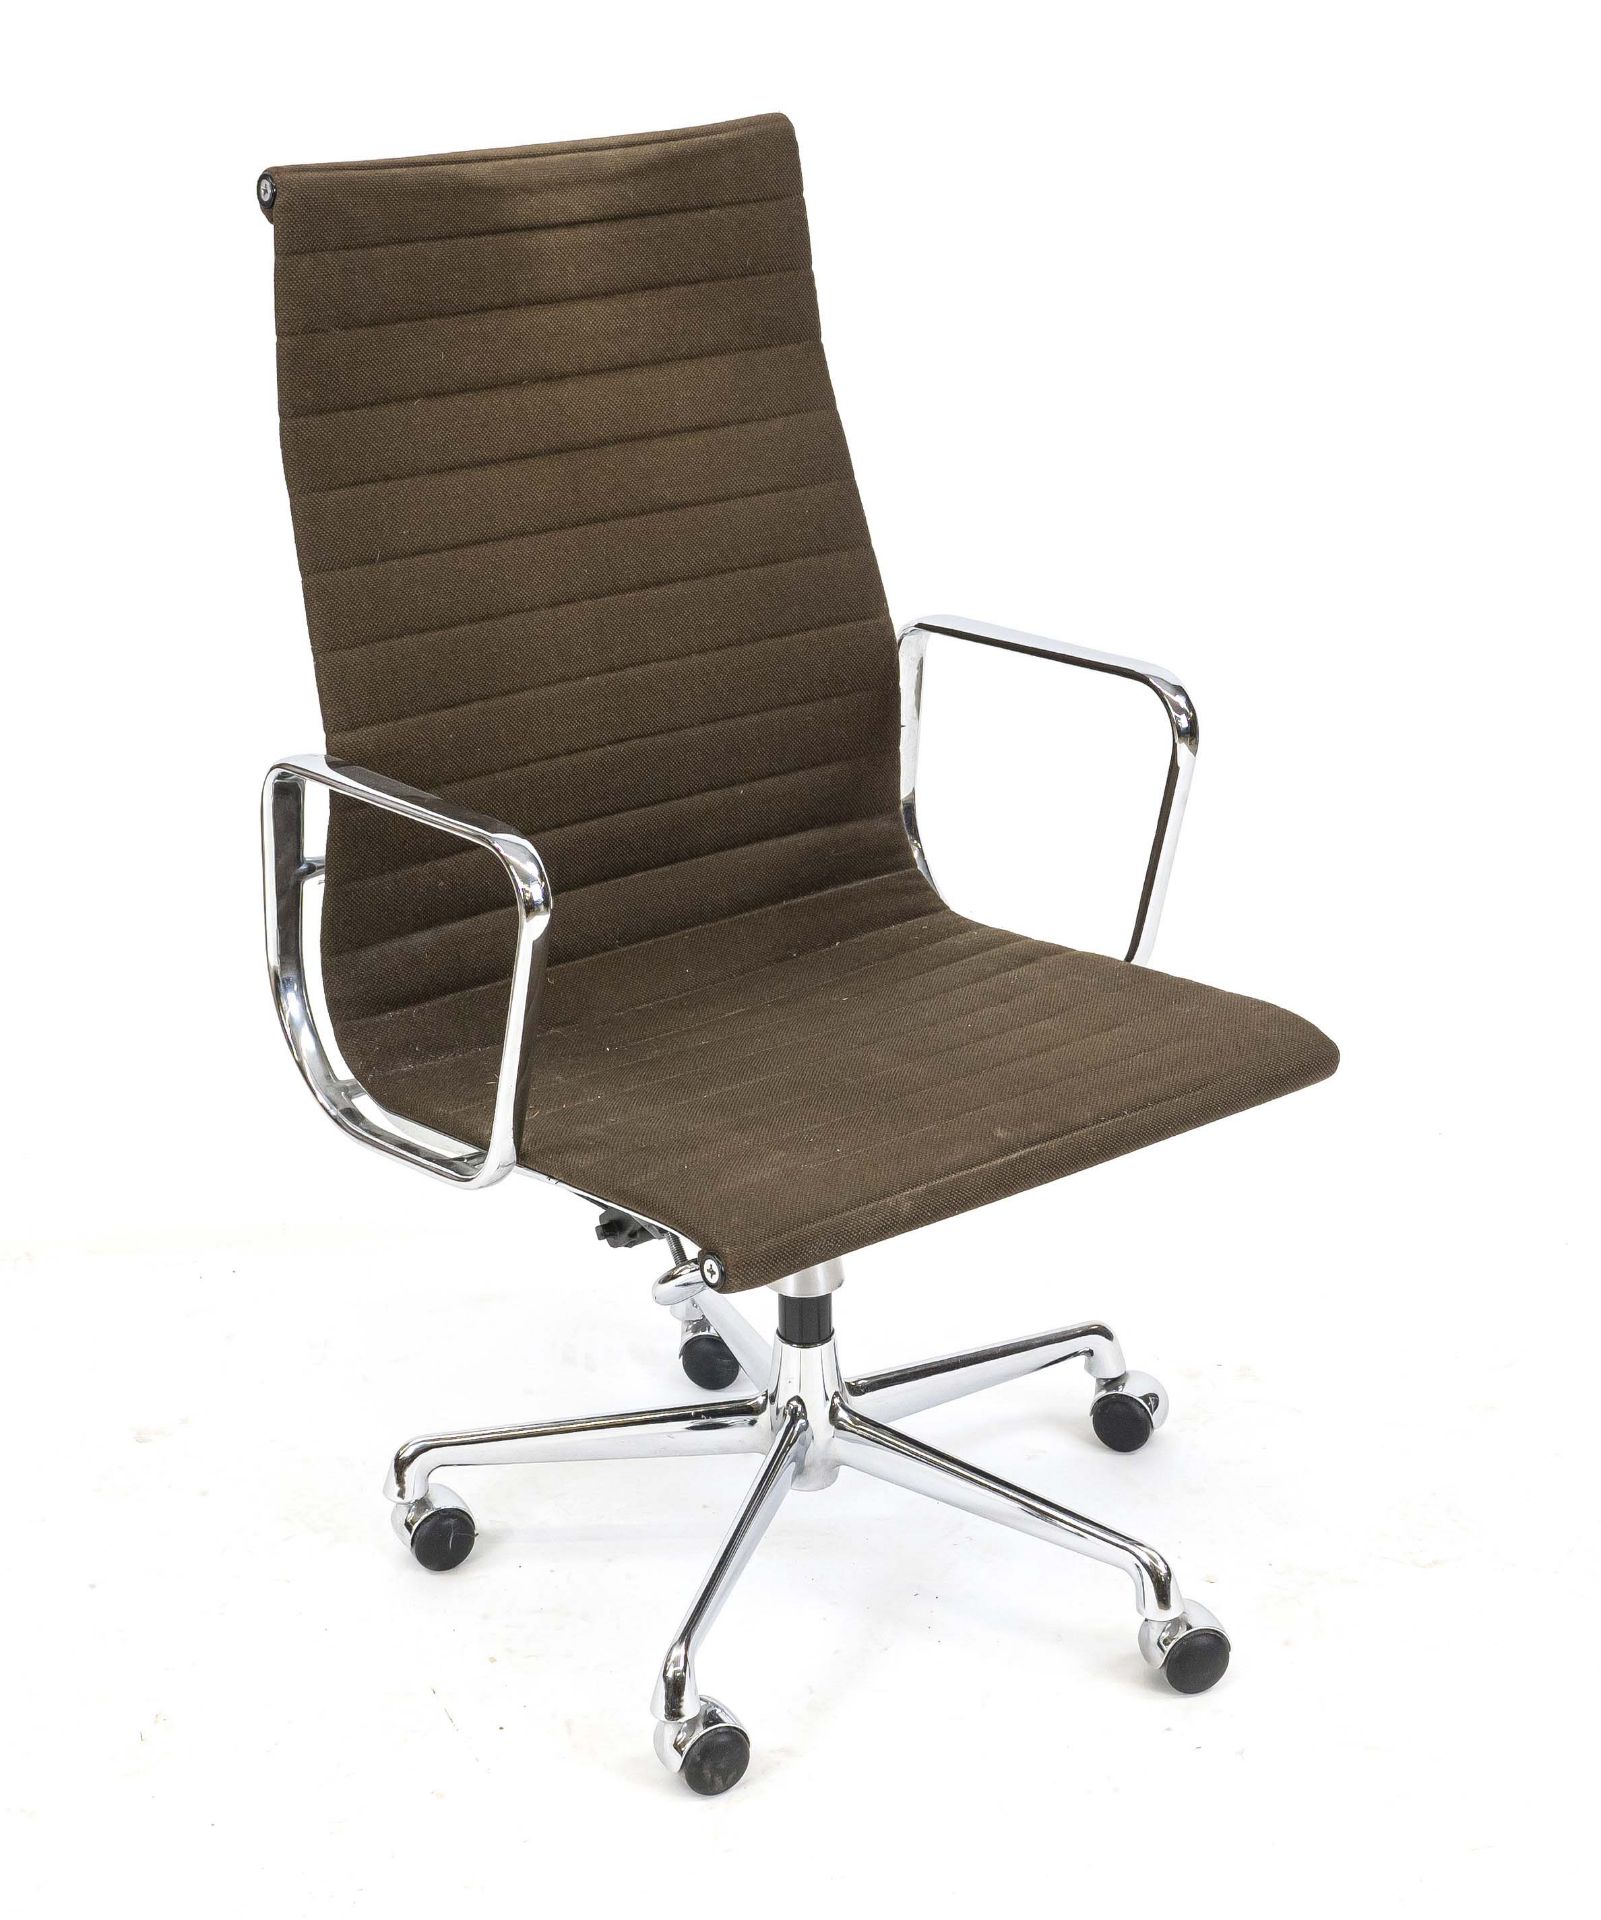 Office chair, Charles Eames, Vitra design, chrome-plated frame on 5 castors, swivel and height-